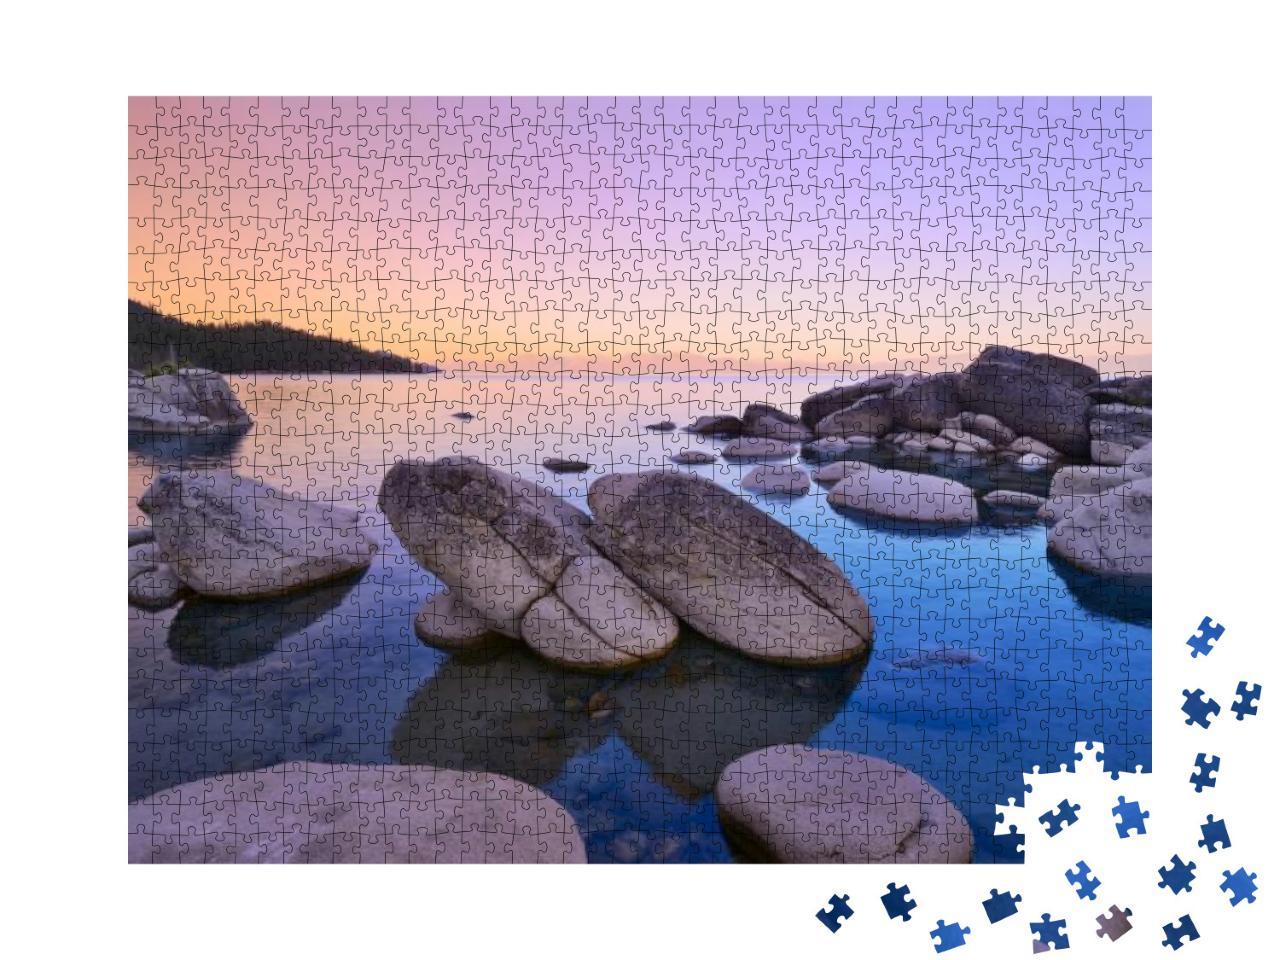 Bonsai Rock At Lake Tahoe, Dawn July 4th, 2012... Jigsaw Puzzle with 1000 pieces